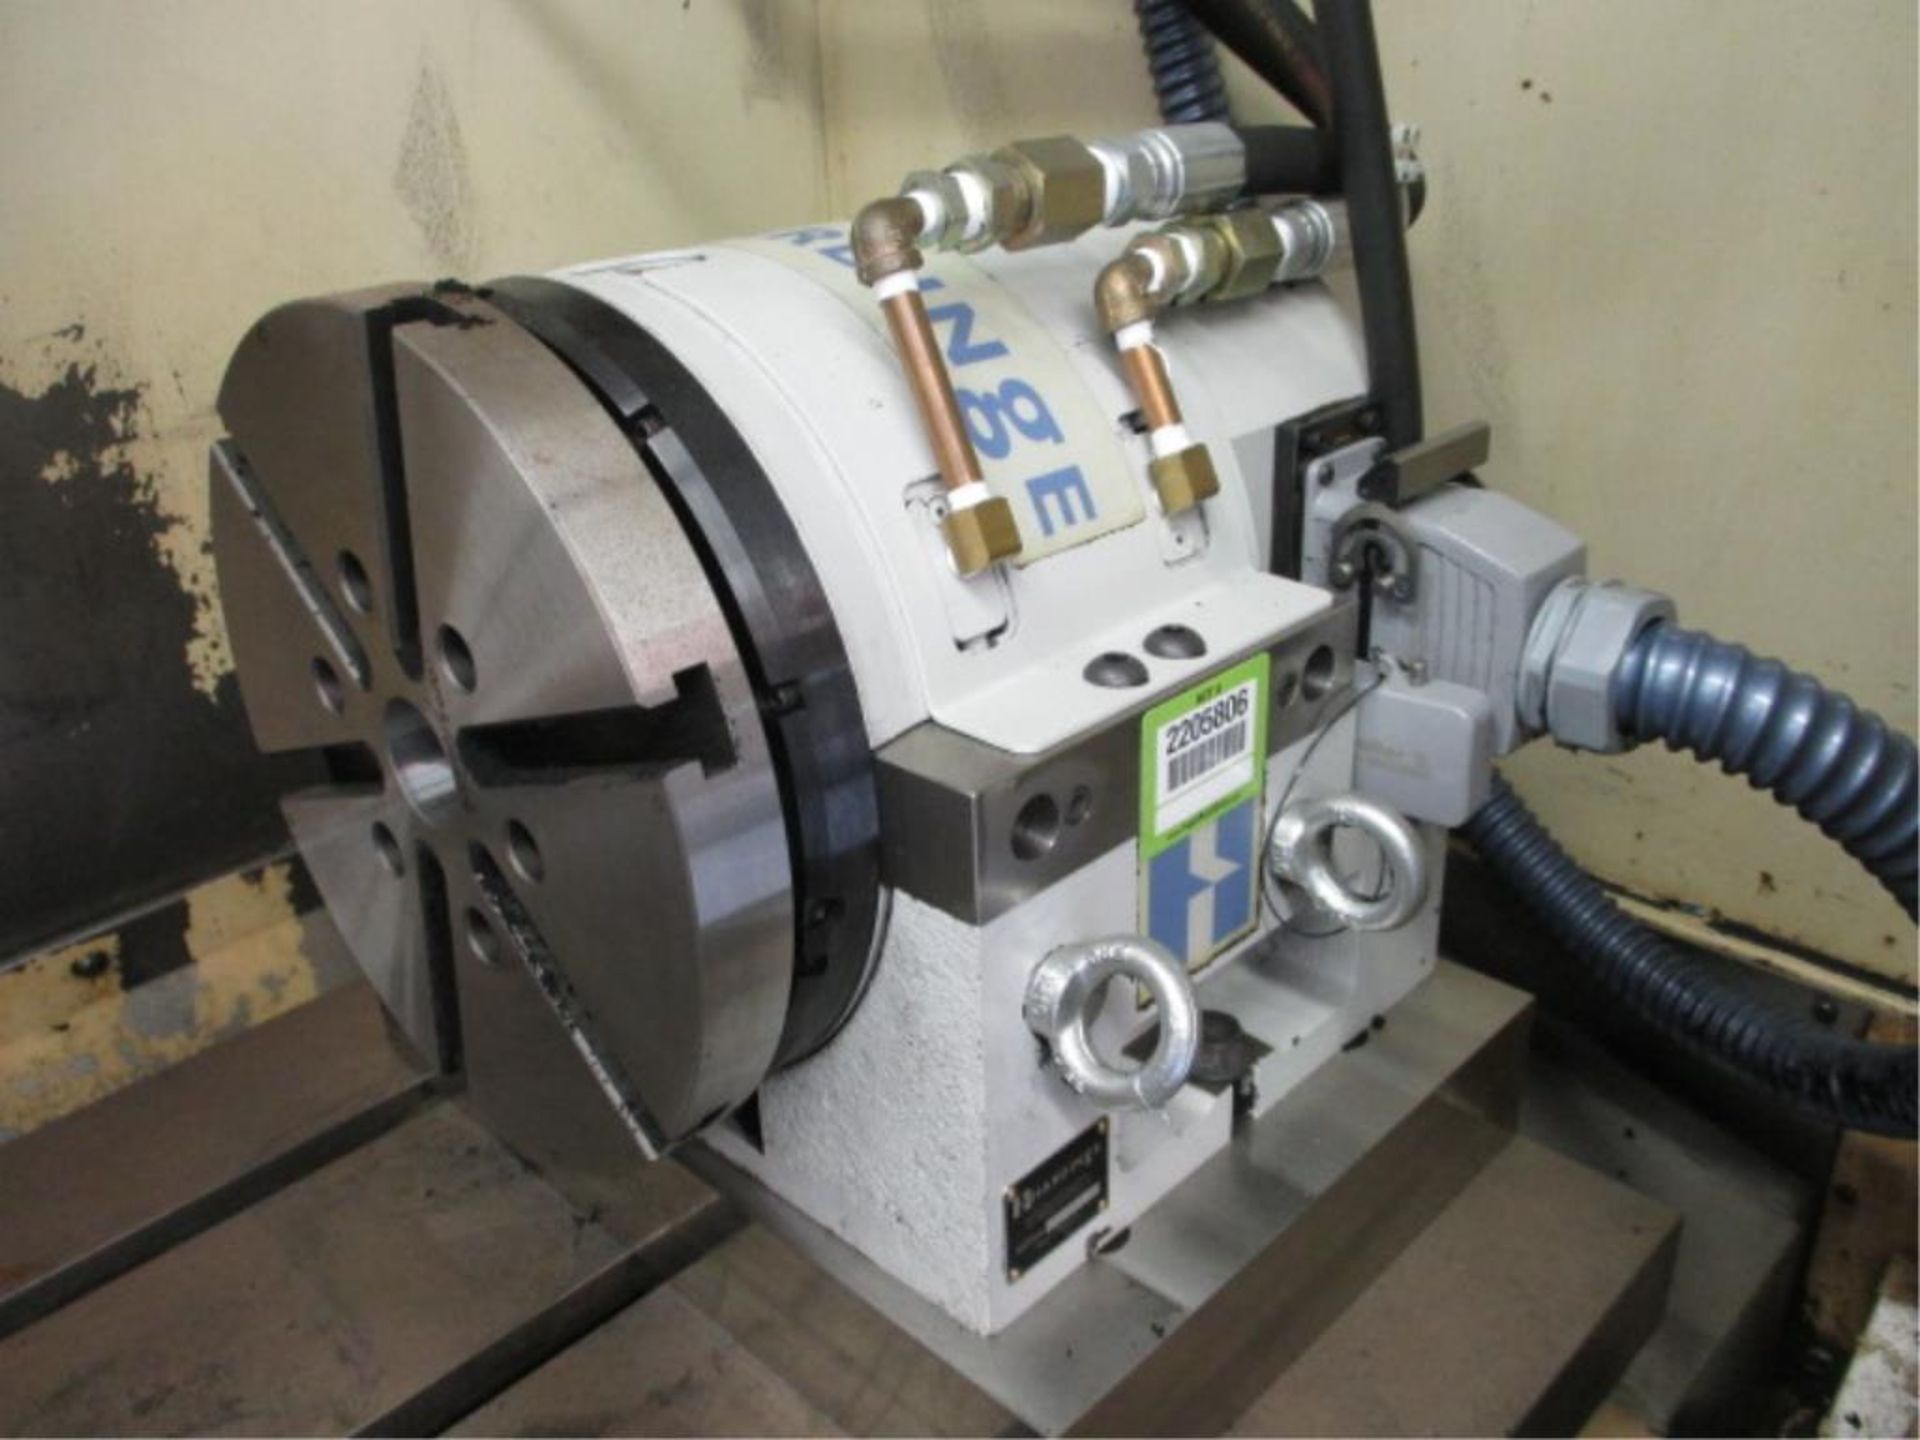 Table Indexer. Hardinge 10" Rotary Table Indexer with Servo Controller. HIT# 2205806. CNC Room.